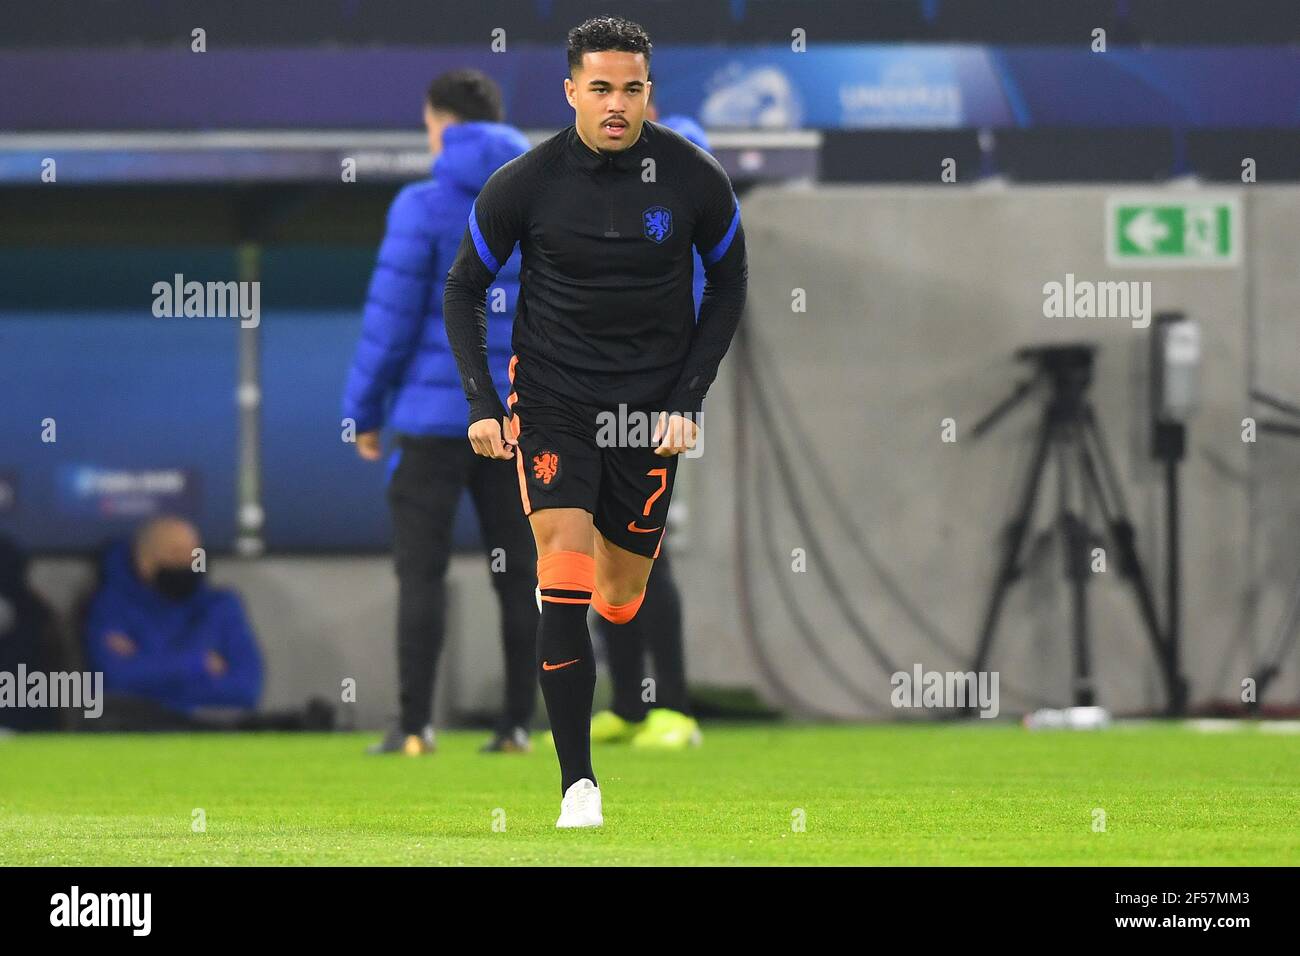 BUDAPEST, 24-03-2021, Bozsik Arna, 2020 / 2021, football, UEFA Under 21 Championships, warming-up Jong Oranje player Justin Kluivert before the match Romania - Jong Oranje (Photo by Pro Shots/Sipa USA) *** World Rights Except Austria and The Netherlands *** Stock Photo